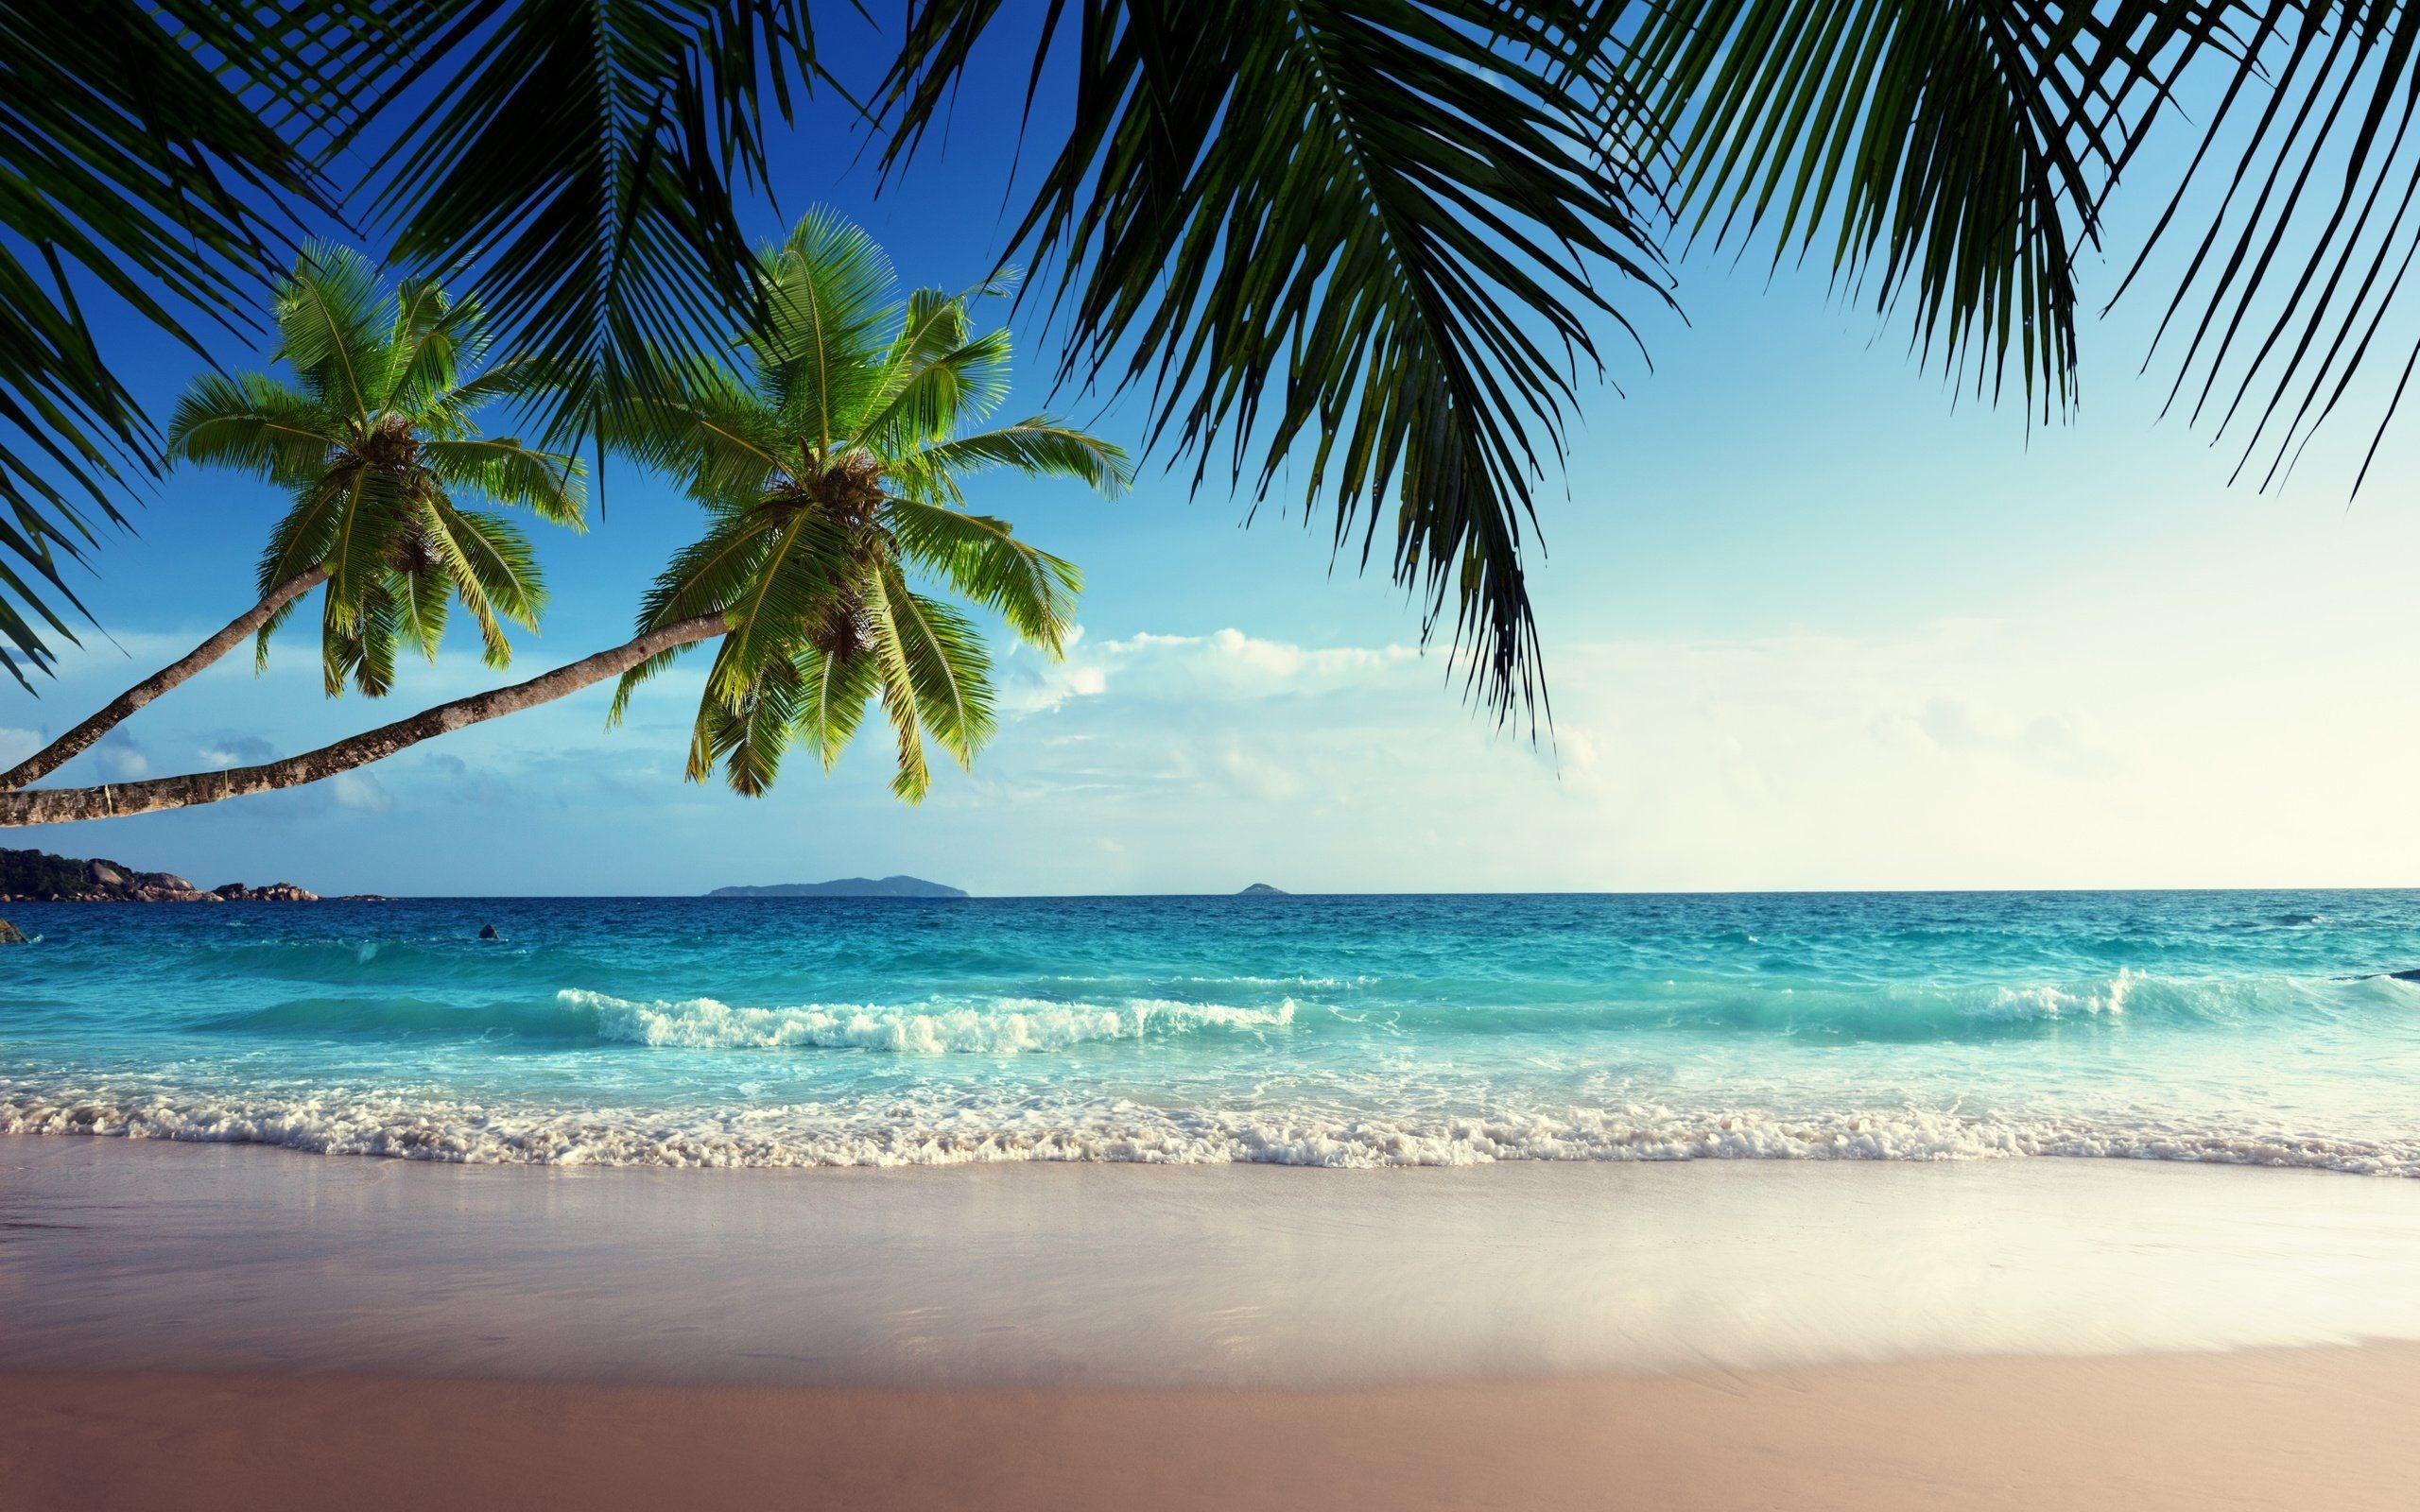 2560x1600 1920x1080 28+ Tropical Beach Backgrounds, Wallpapers, Images, Pictures ...">